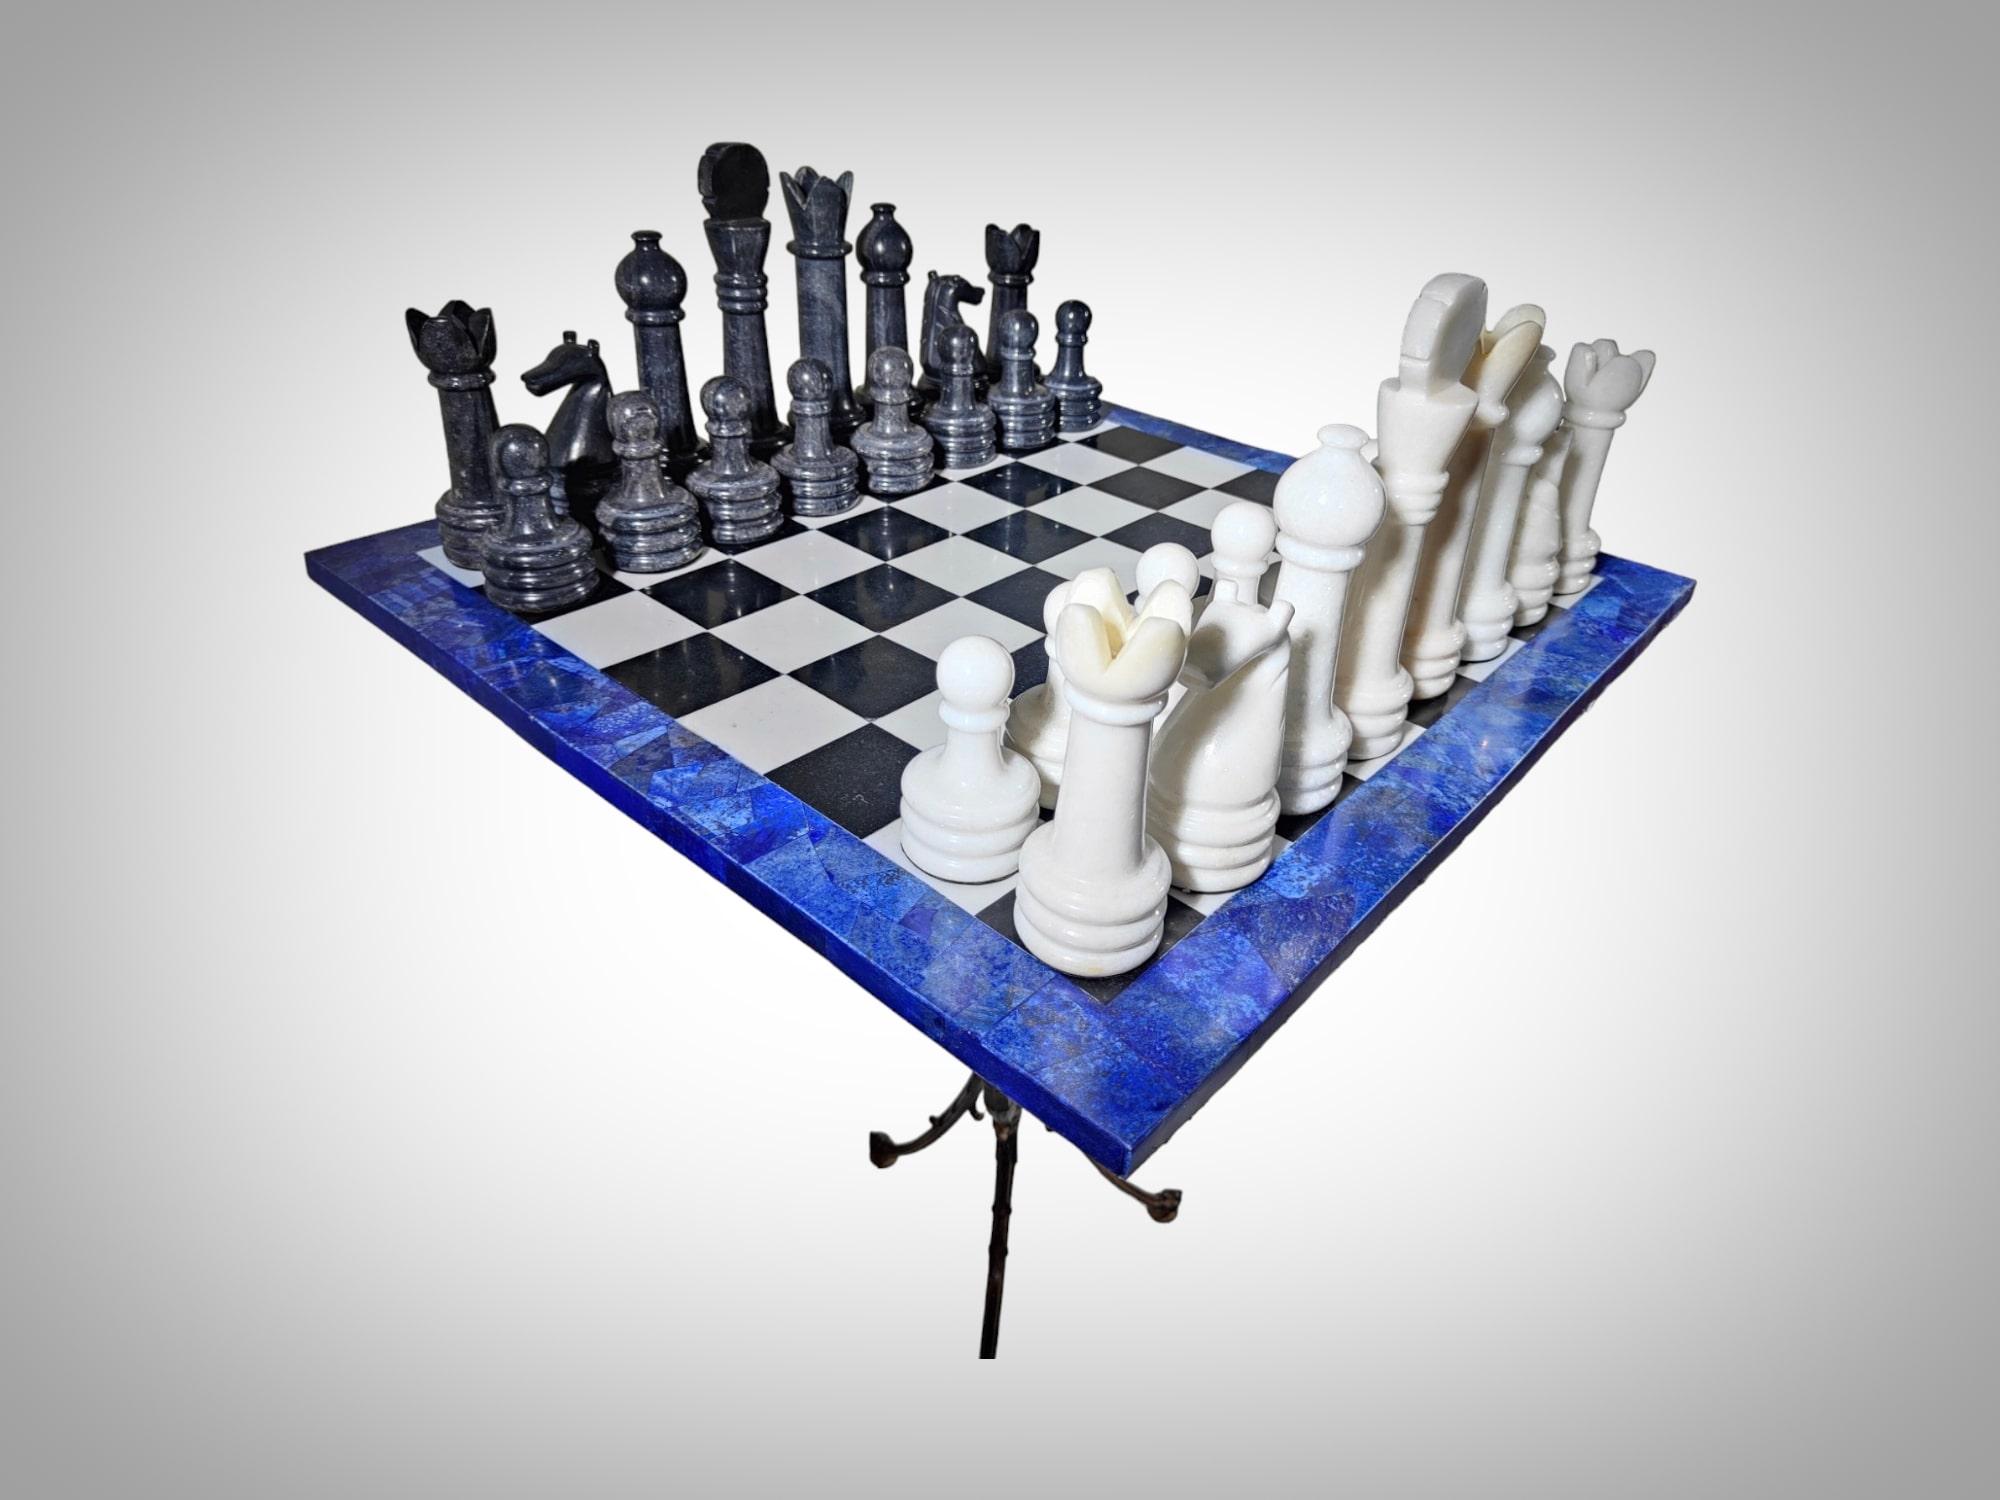 Italian Chess Table from the 1950s - Lapis Lazuli, Marble, and Dragon-Shaped  For Sale 4